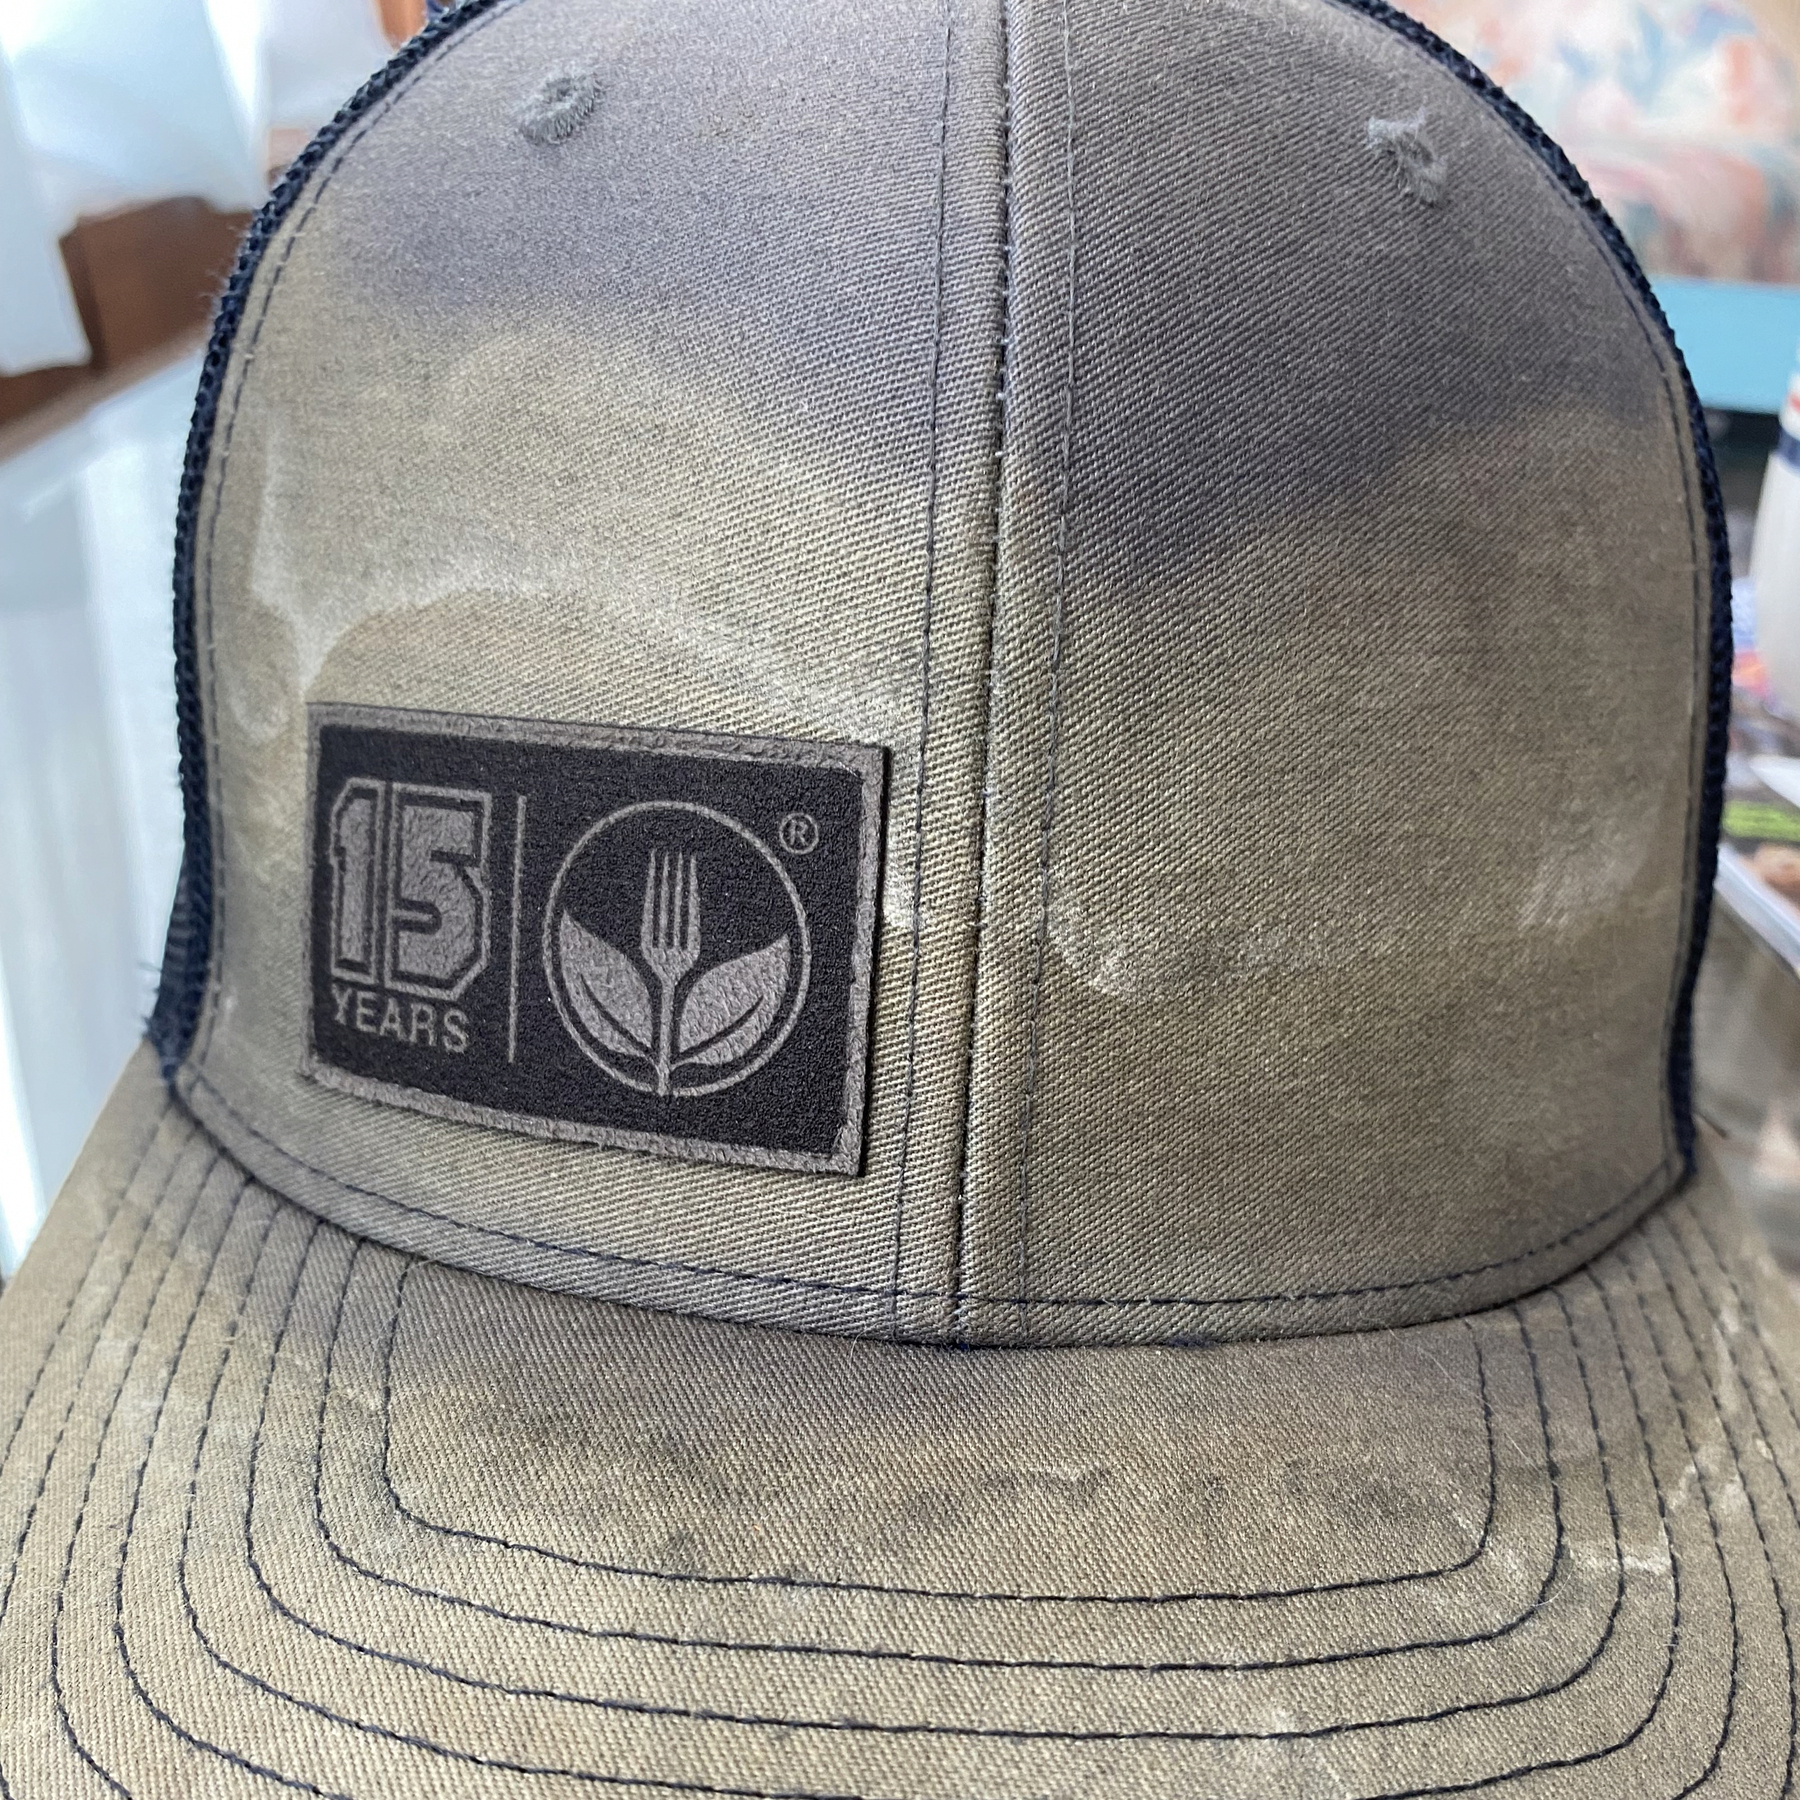 Sweat stained gray and black trucker hat with a 15 years Agrian logo.